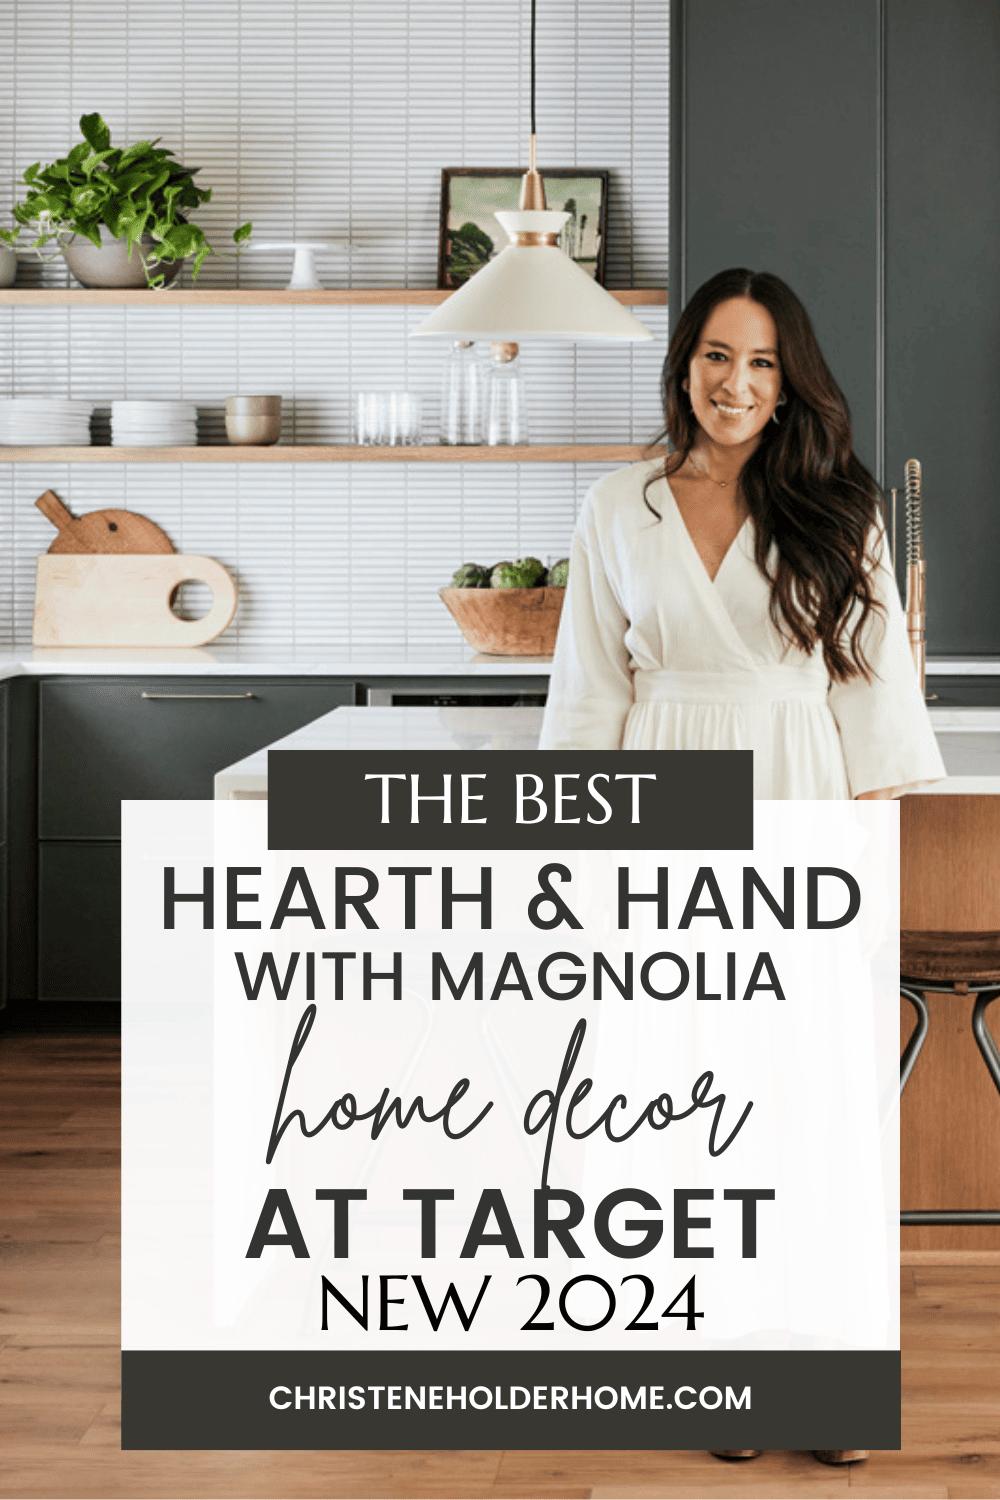 https://www.christeneholderhome.com/wp-content/uploads/2023/01/The-Best-Hearth-and-Hand-with-Magnolia-Home-Decor-at-Target-2024.png